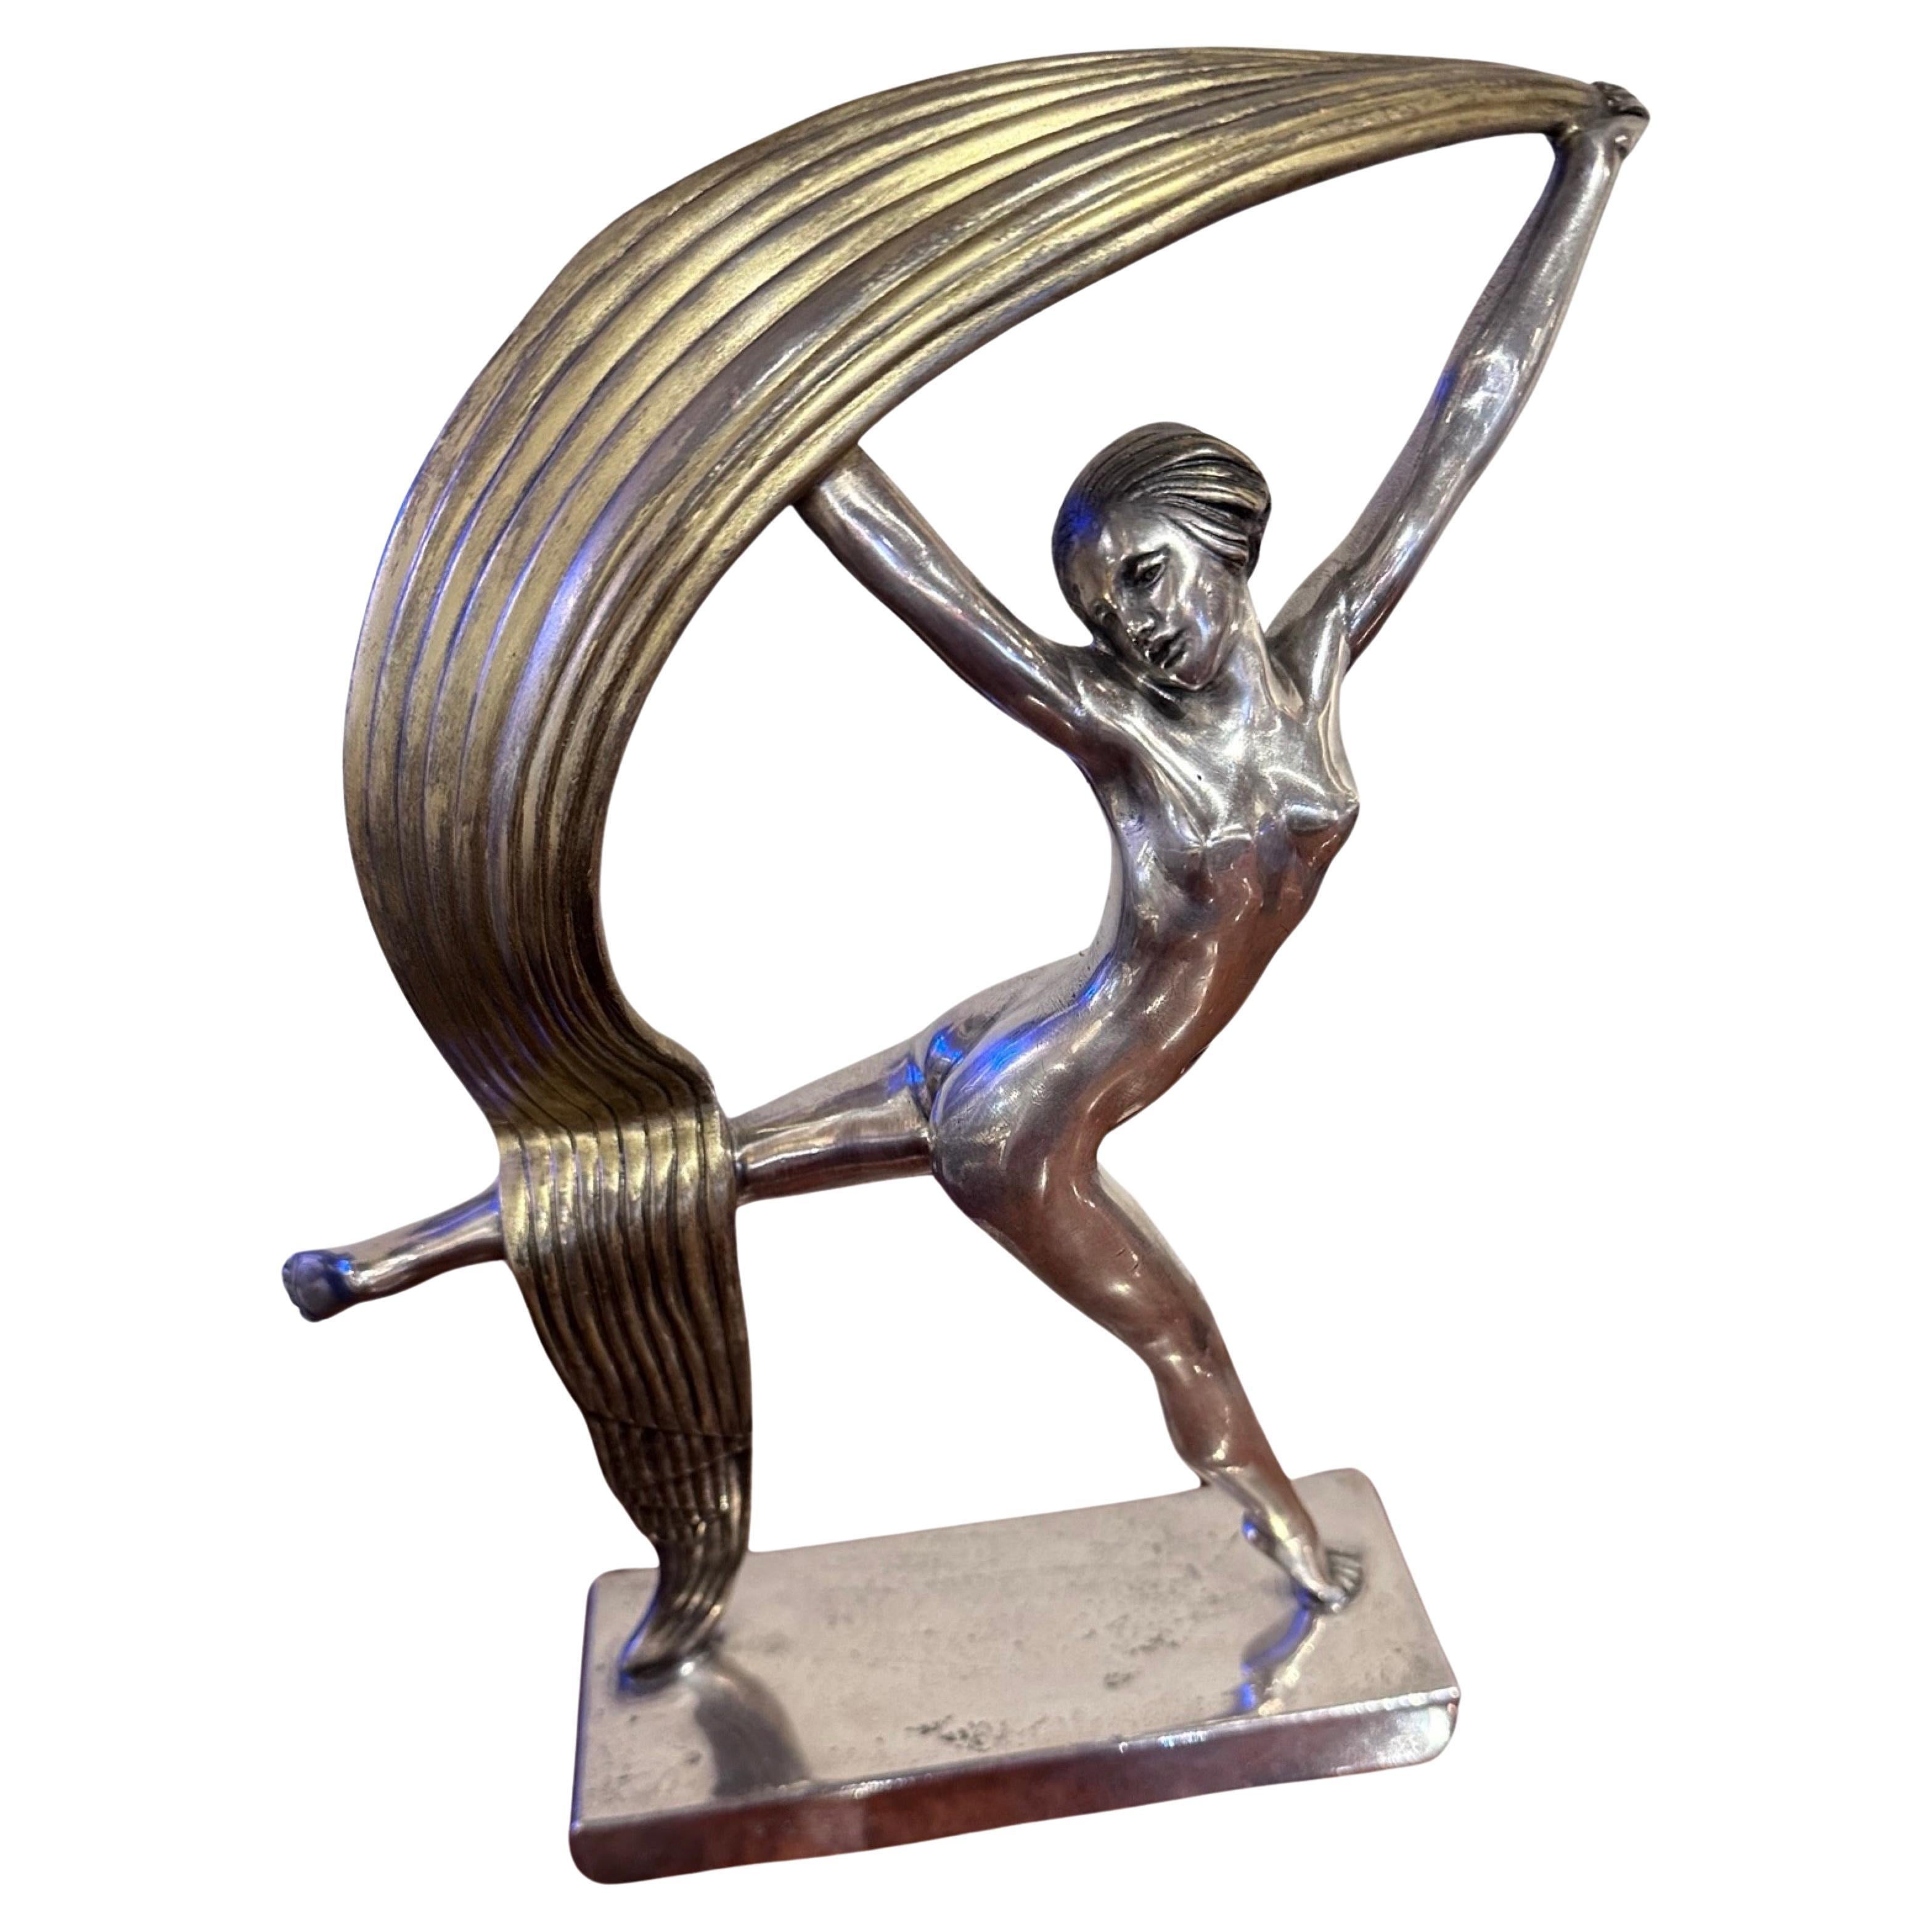 An Art Deco Bronze Scarf Dancer by Alexandre Kéléty, created in France in 1925, depicts a dancer holding a stylized silver-plated and gilded scarf mounted on a silvered bronze base. This silver-plated and gilded bronze sculpture is a symphony of